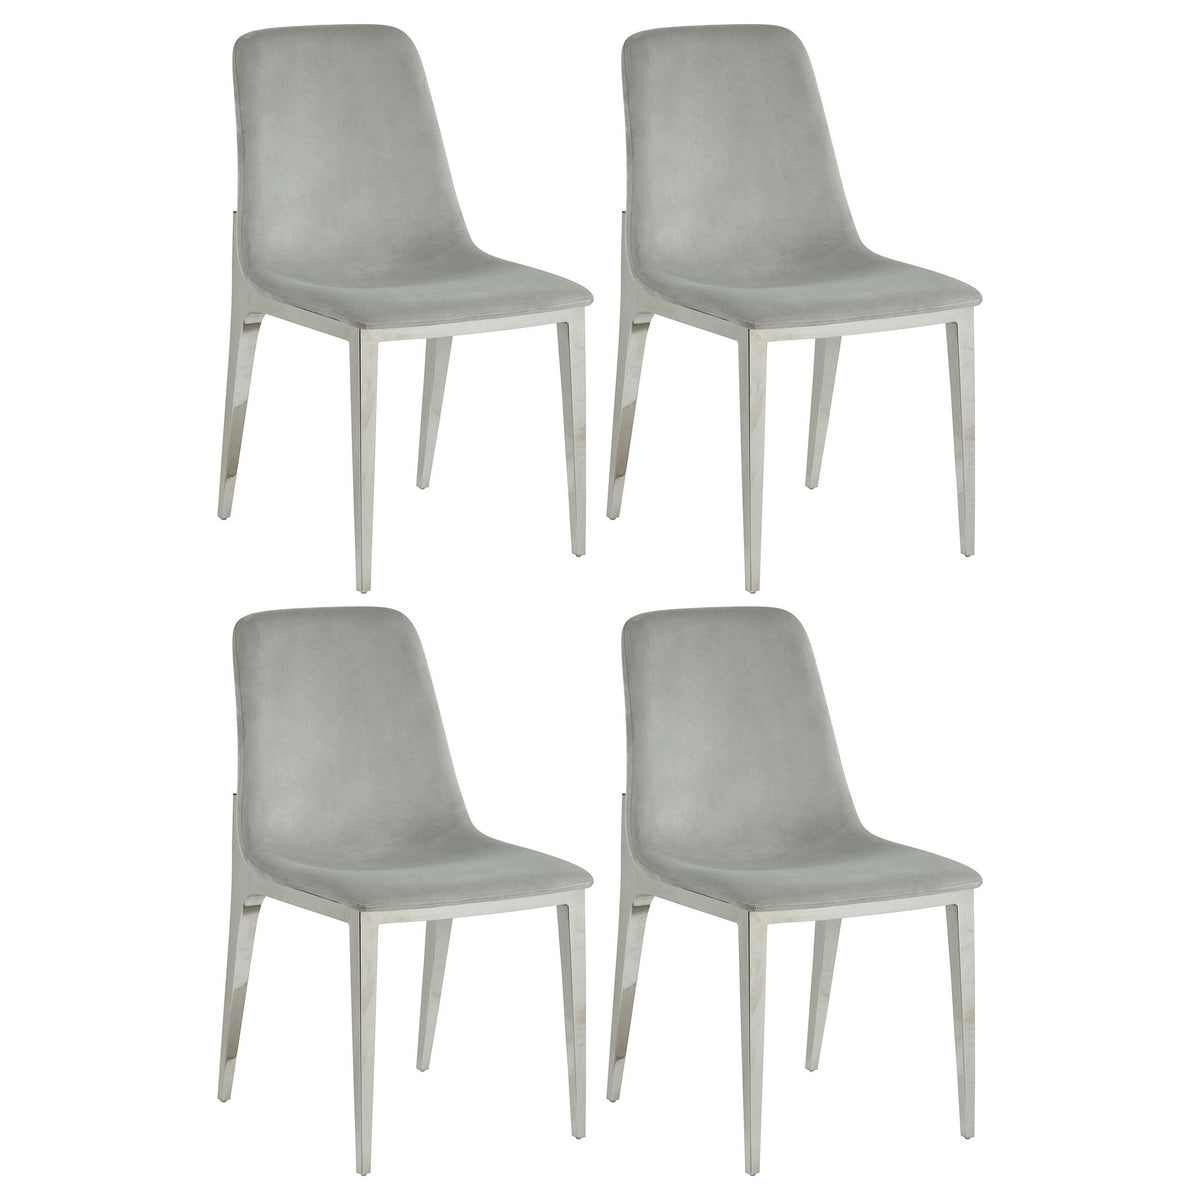 Irene Upholstered Side Chairs Light Grey and Chrome (Set of 4)  Las Vegas Furniture Stores